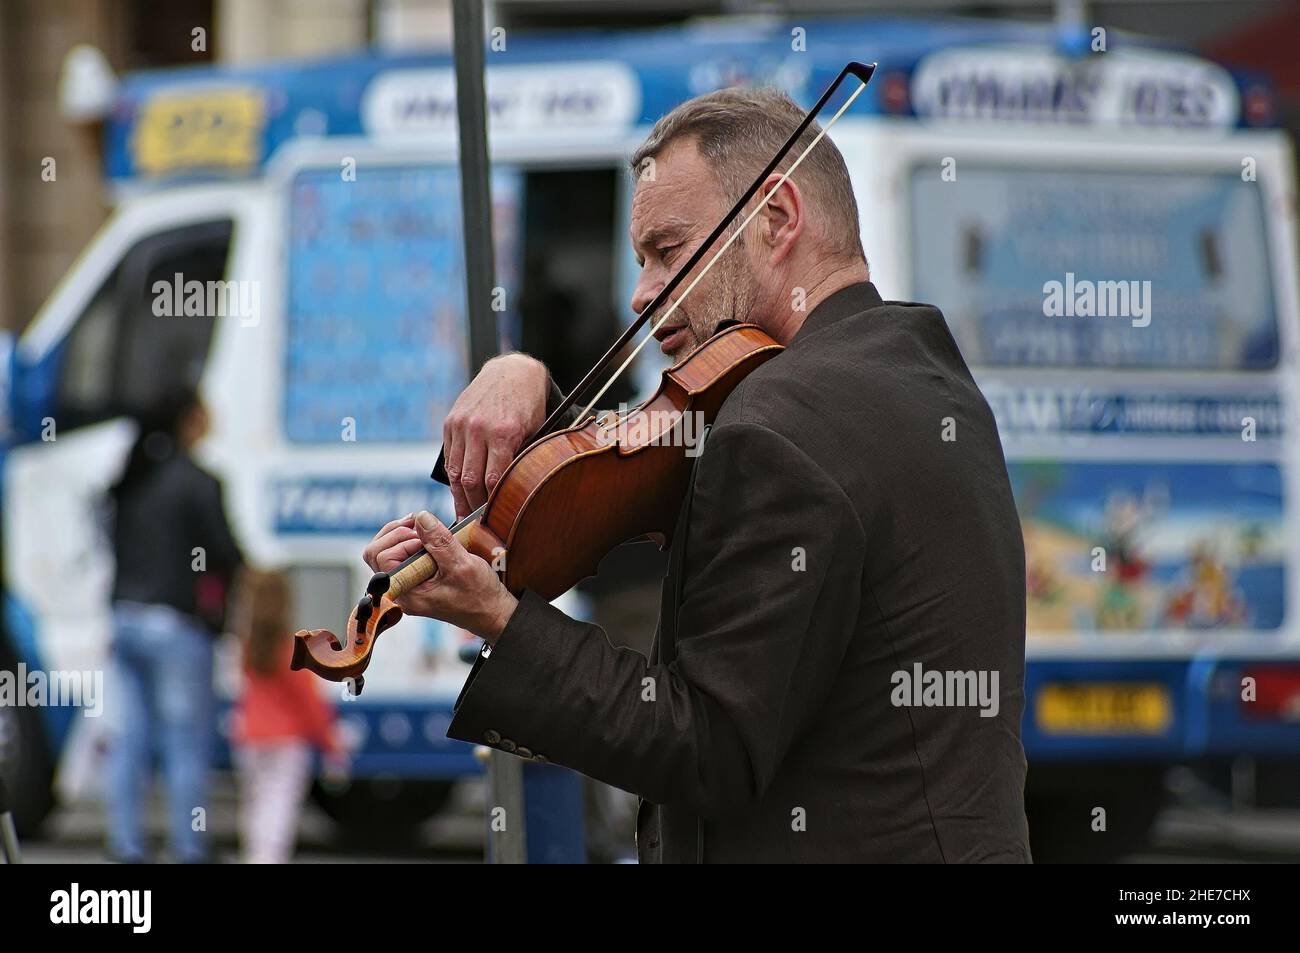 Man playing violin in the outdoor town centre market Stock Photo